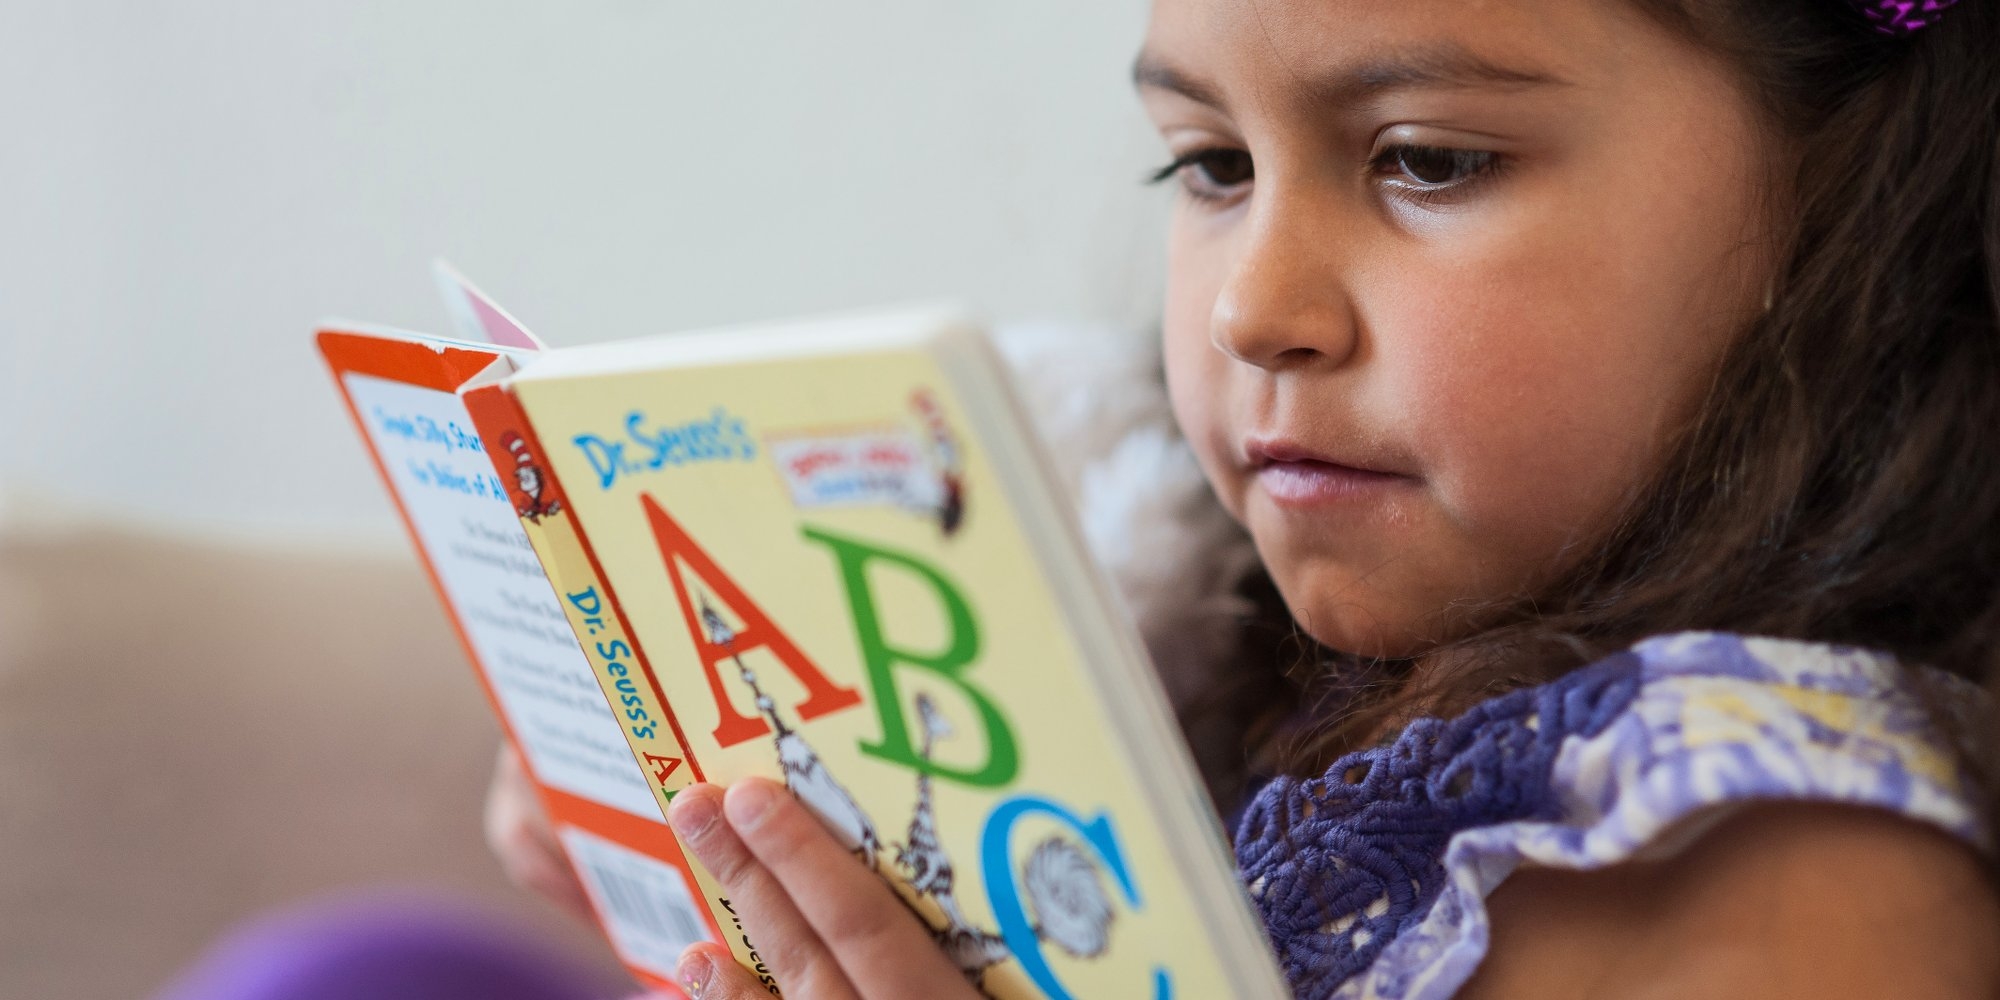 A close up shot of a young girl read a book with ABC on the cover.